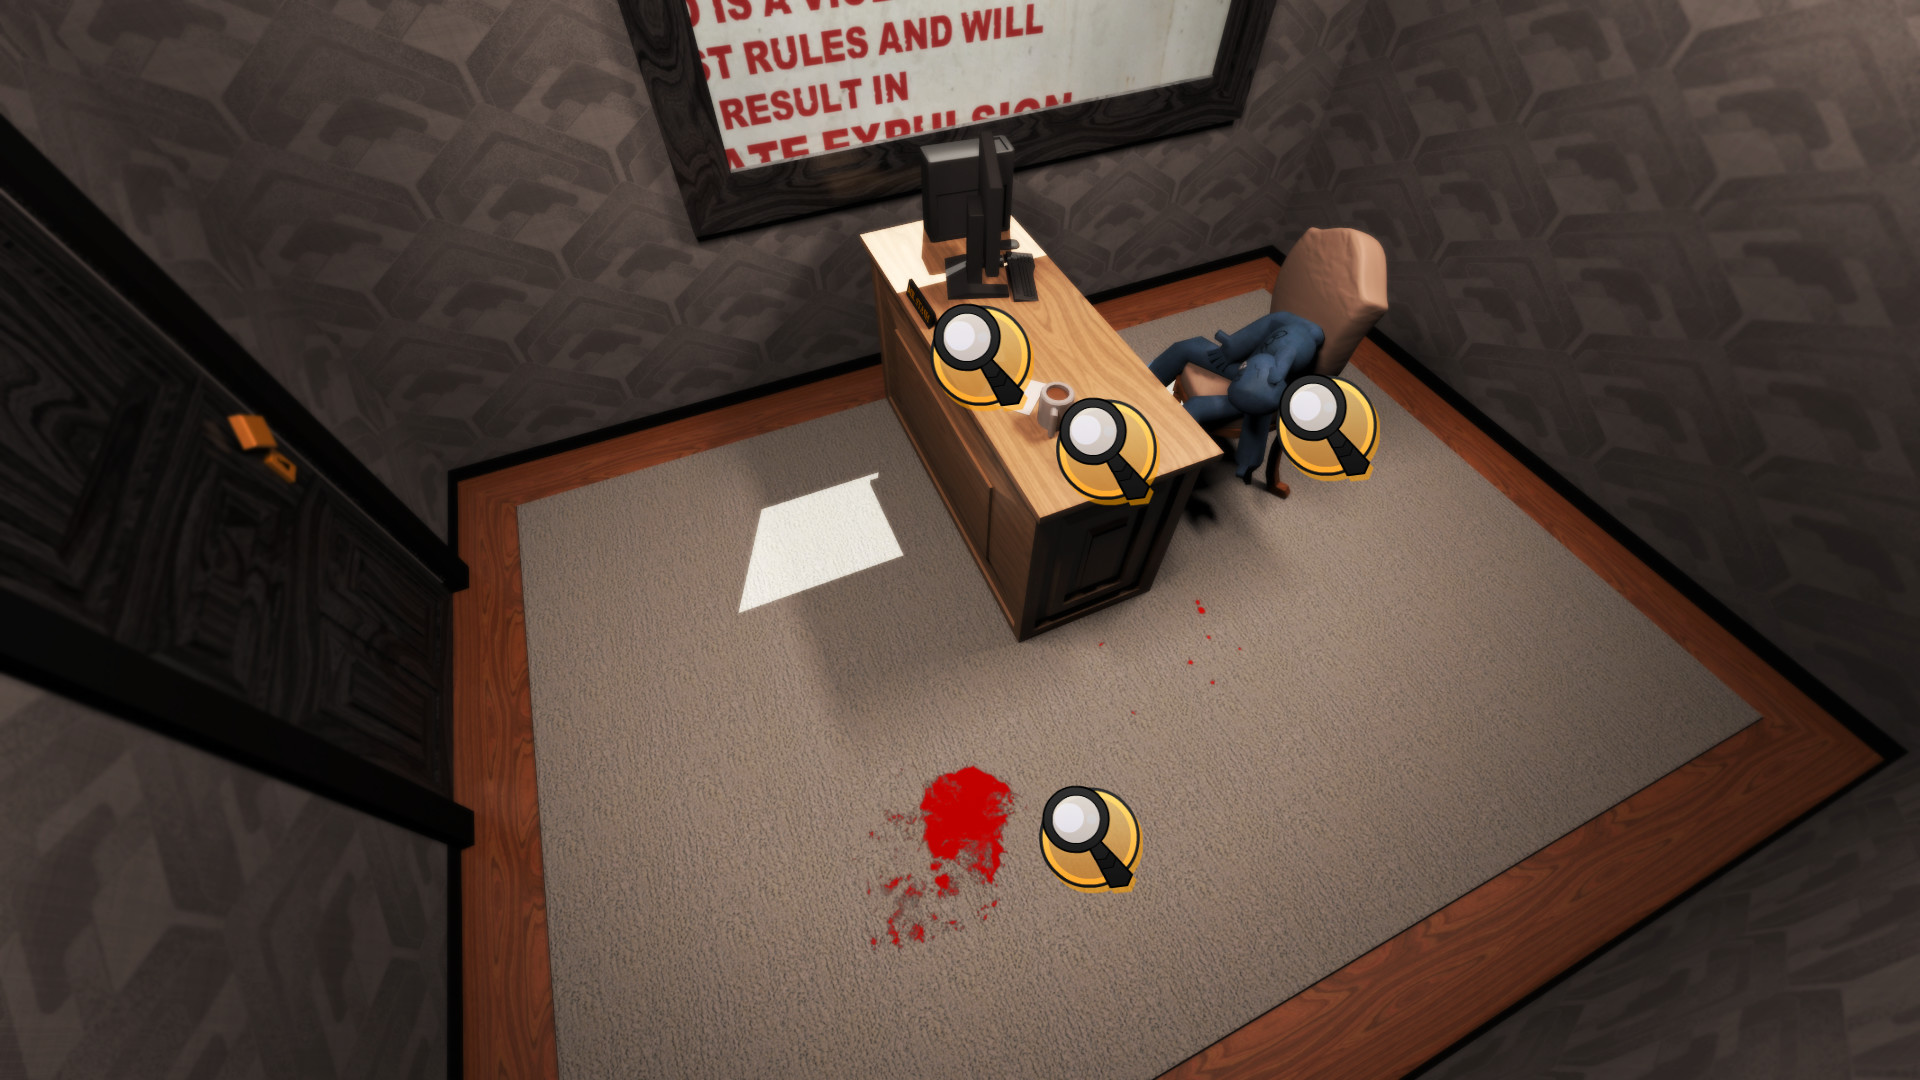 Methods: The Detective Competition screenshot